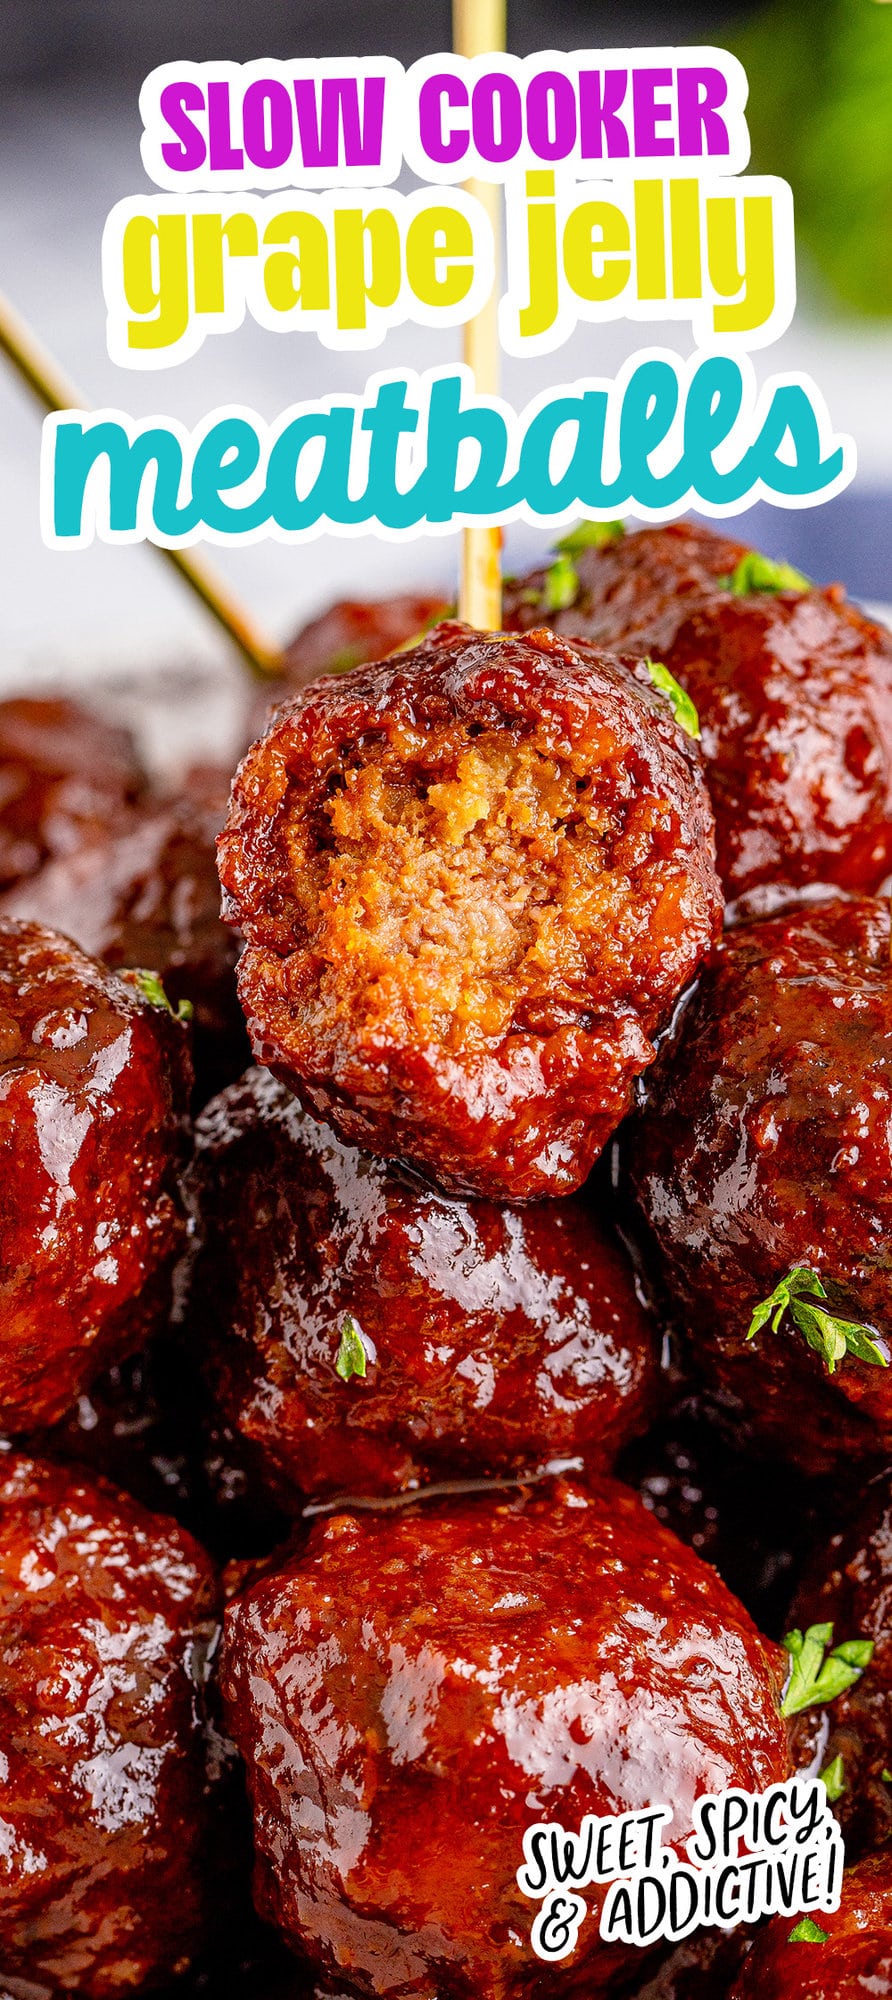 picture of a meatball with a toothpick in it and a bite taken out of it on top of a pile of grape jelly meatballs stacked on a plate with pieces of parsley chopped on top